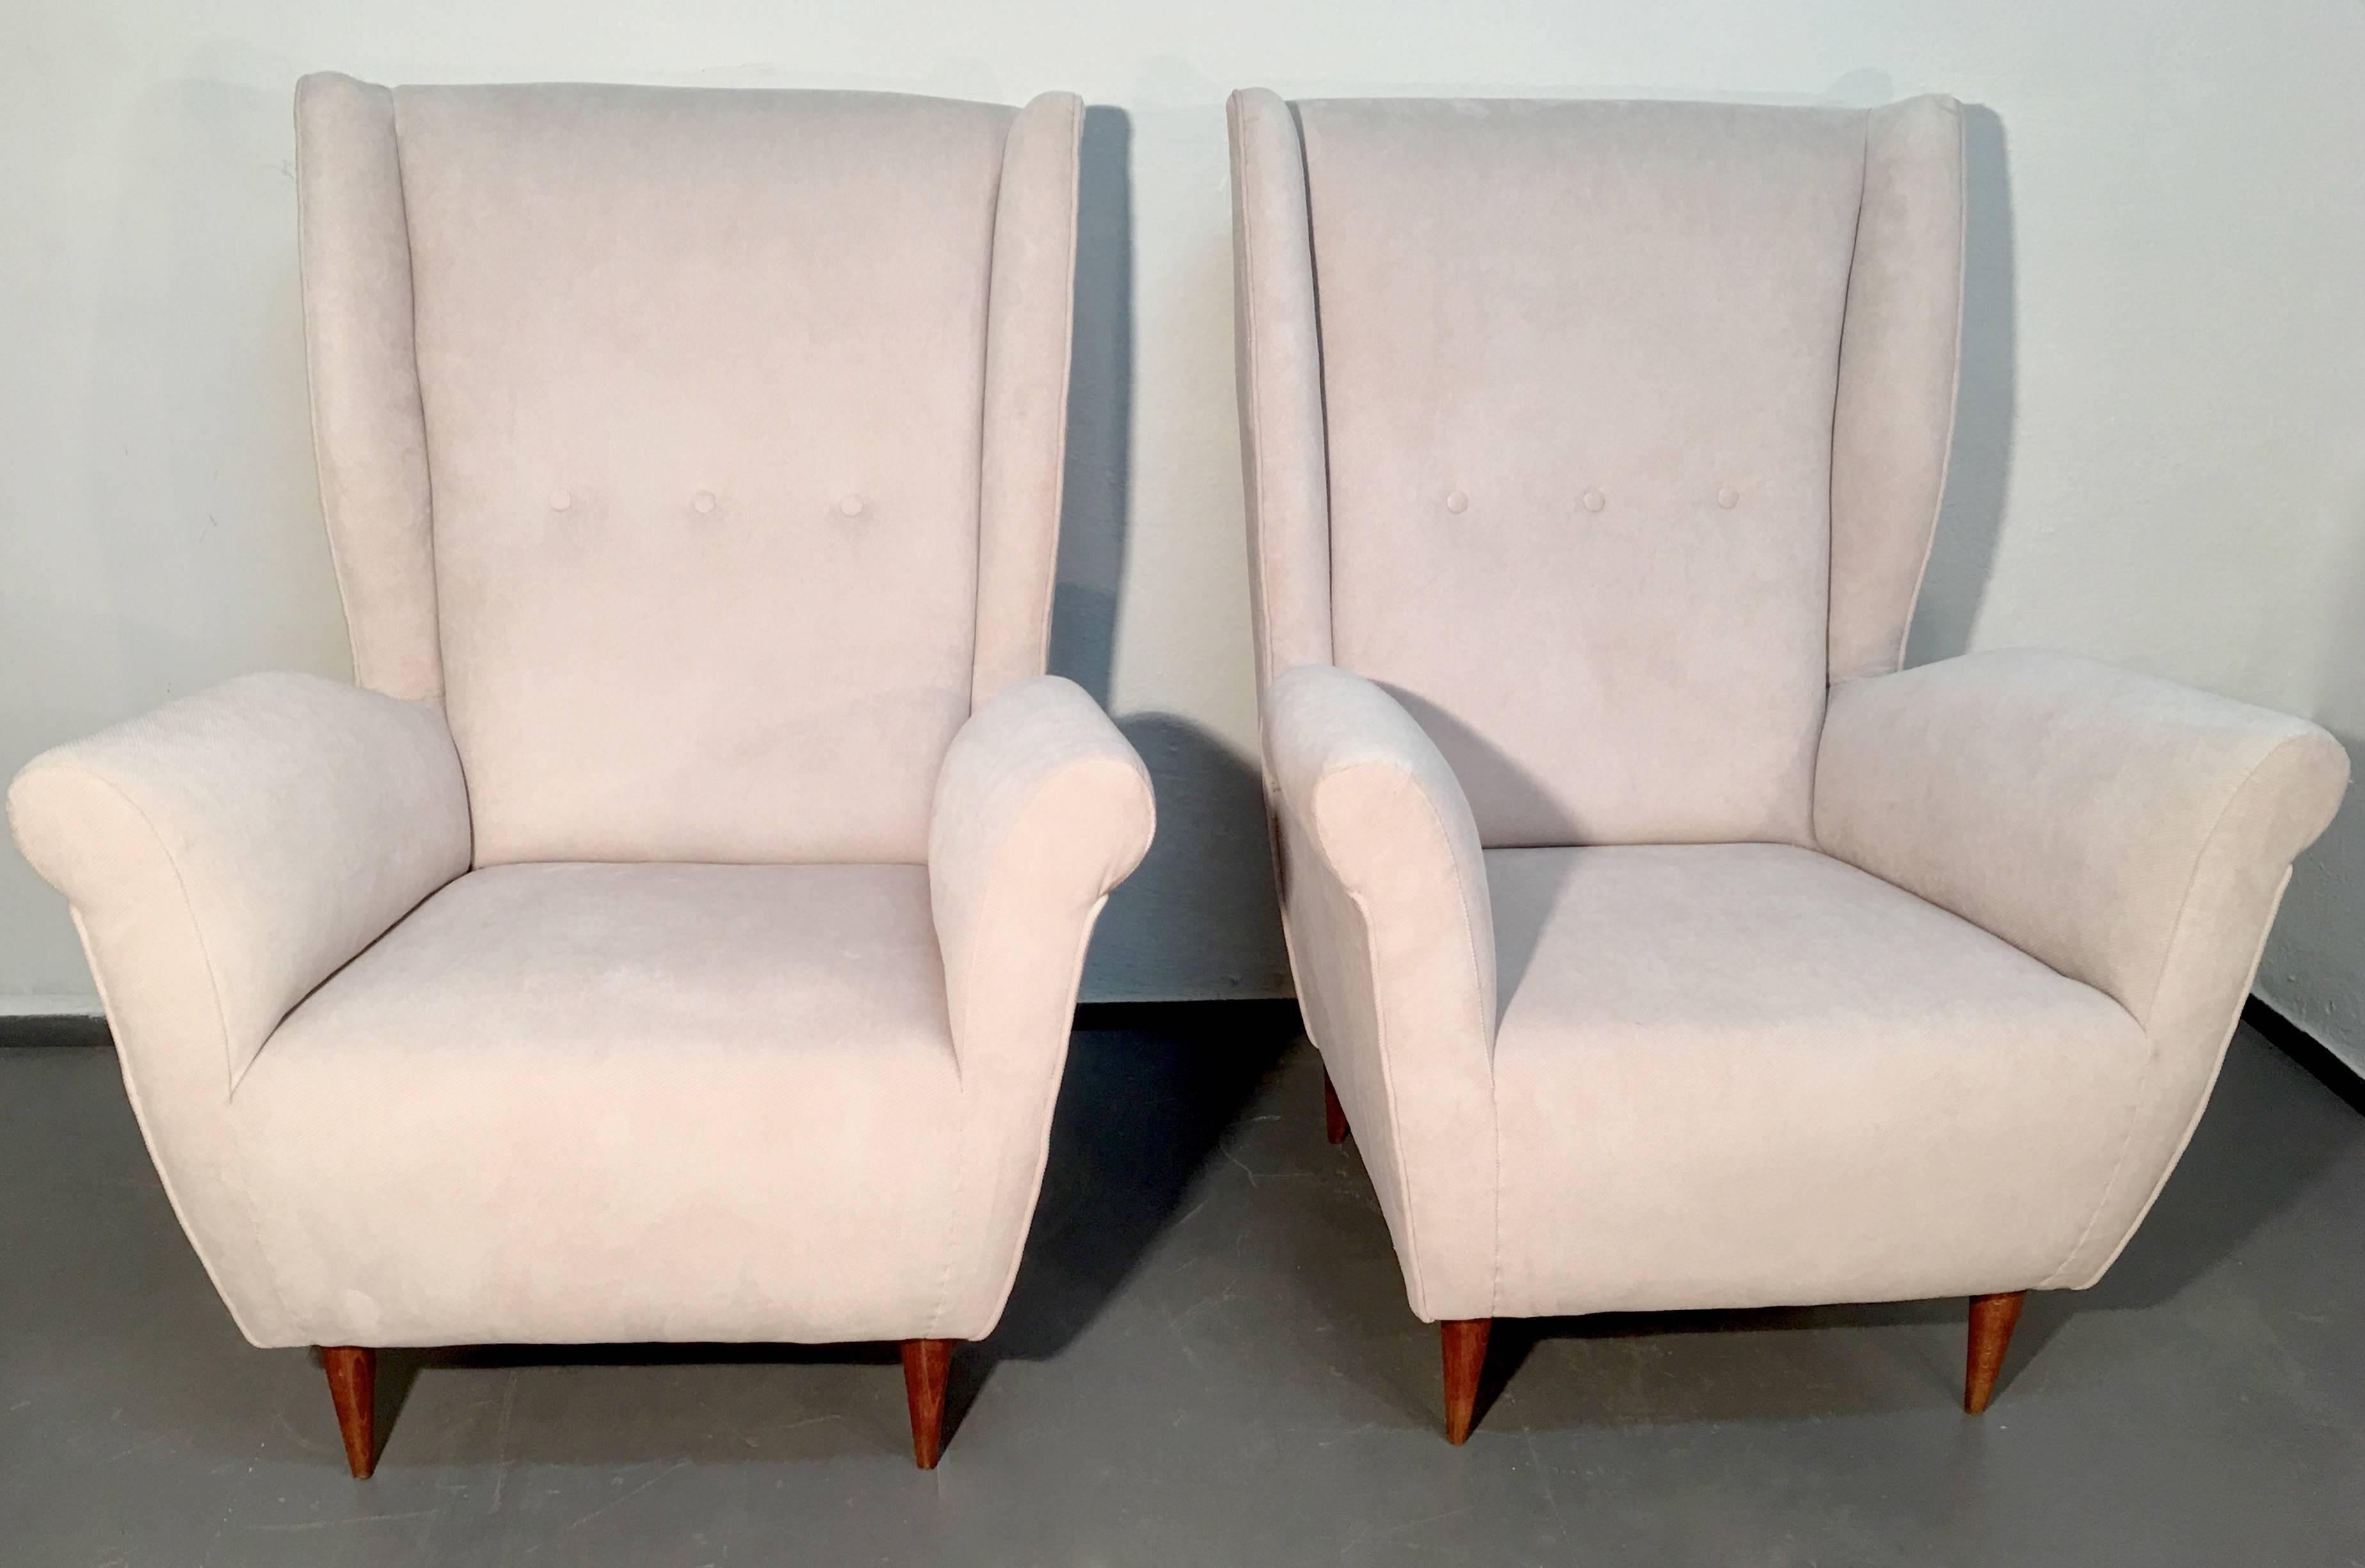 Pair of Italian midcentury lounge chairs for I.S.A. Bergamo, Italy, 1940s.
Newly upholstered, tapered wooden legs.
Att. Gio Ponti